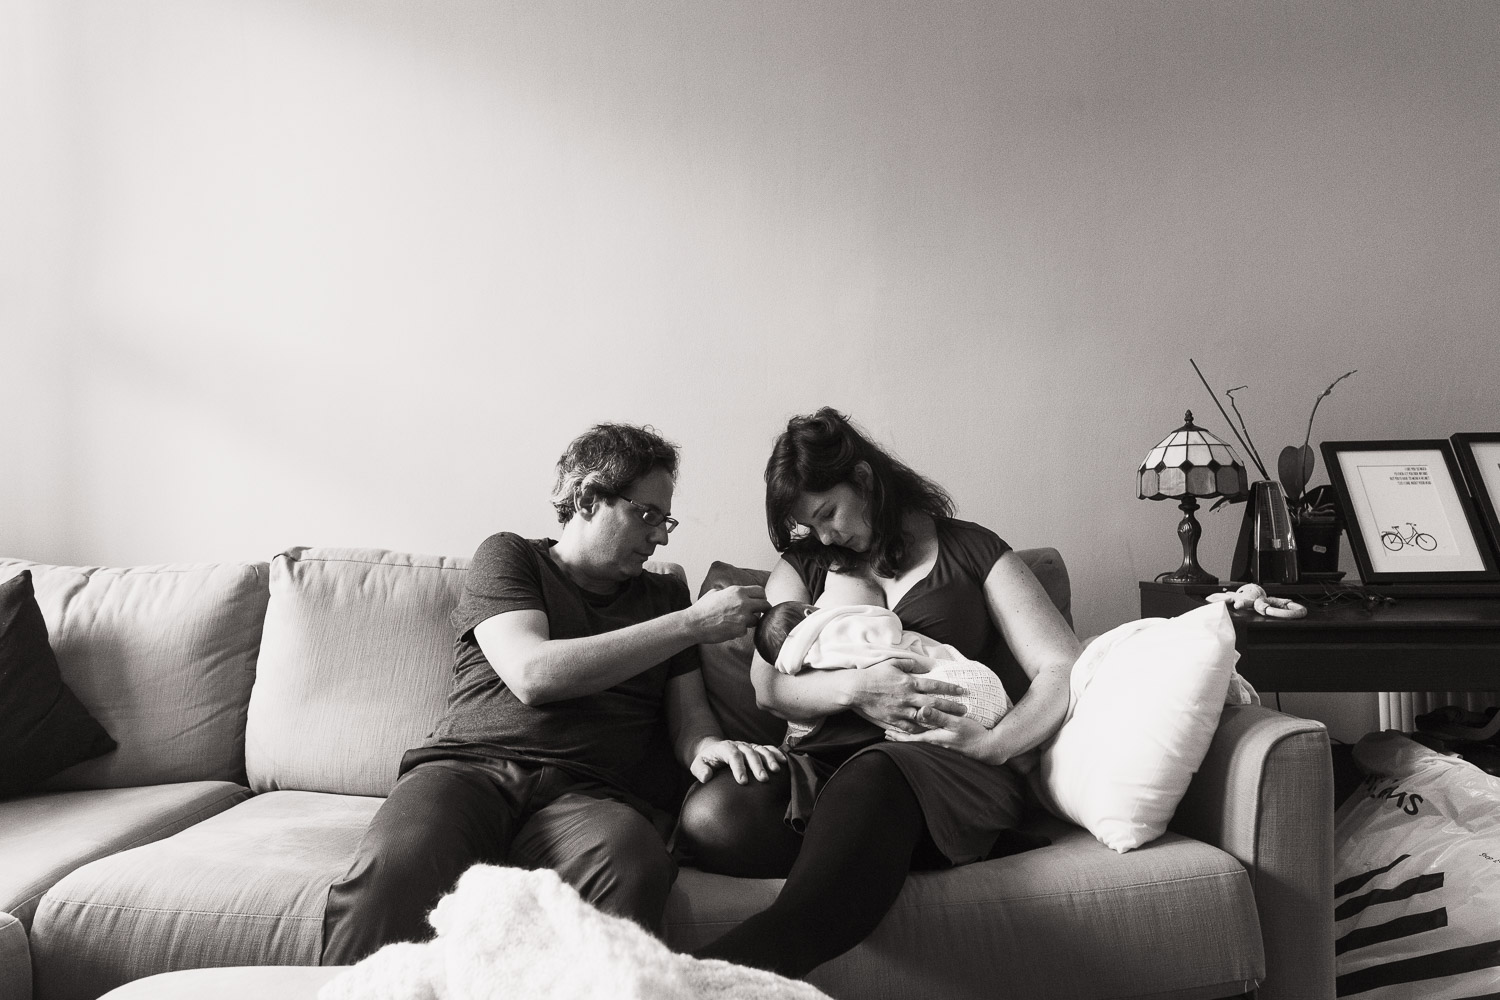 Mum feeding her baby, sat on the sofa with her husband. Relaxed family newborn photography at home.